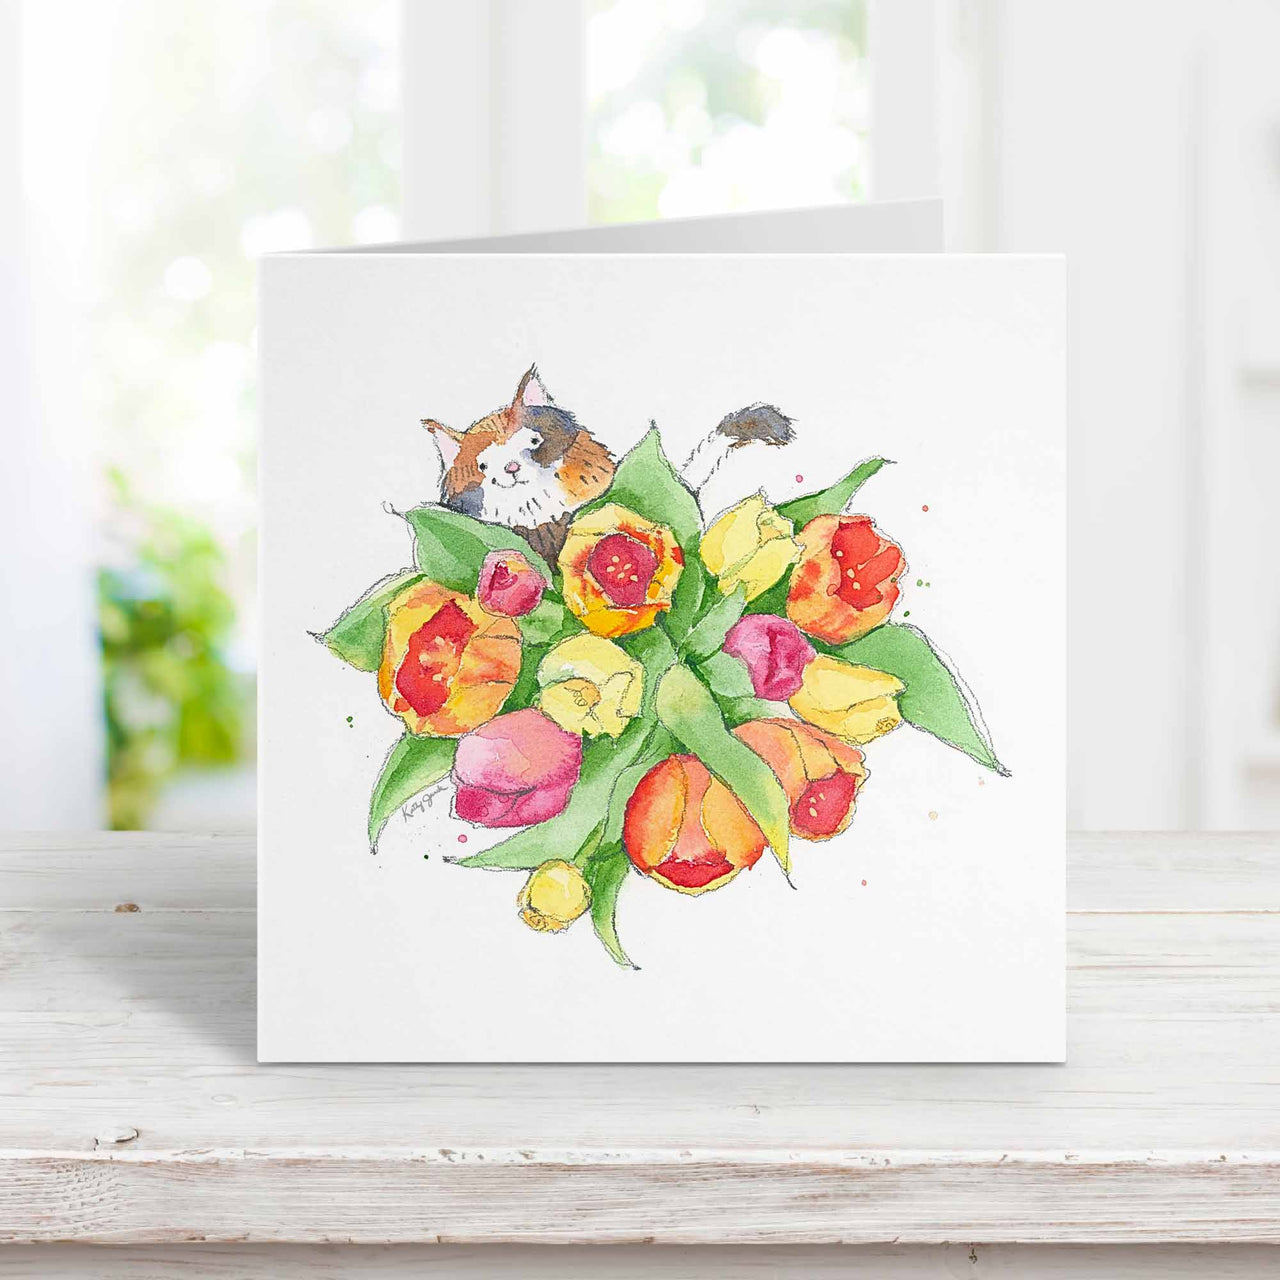 calico cat card for mom birthday 